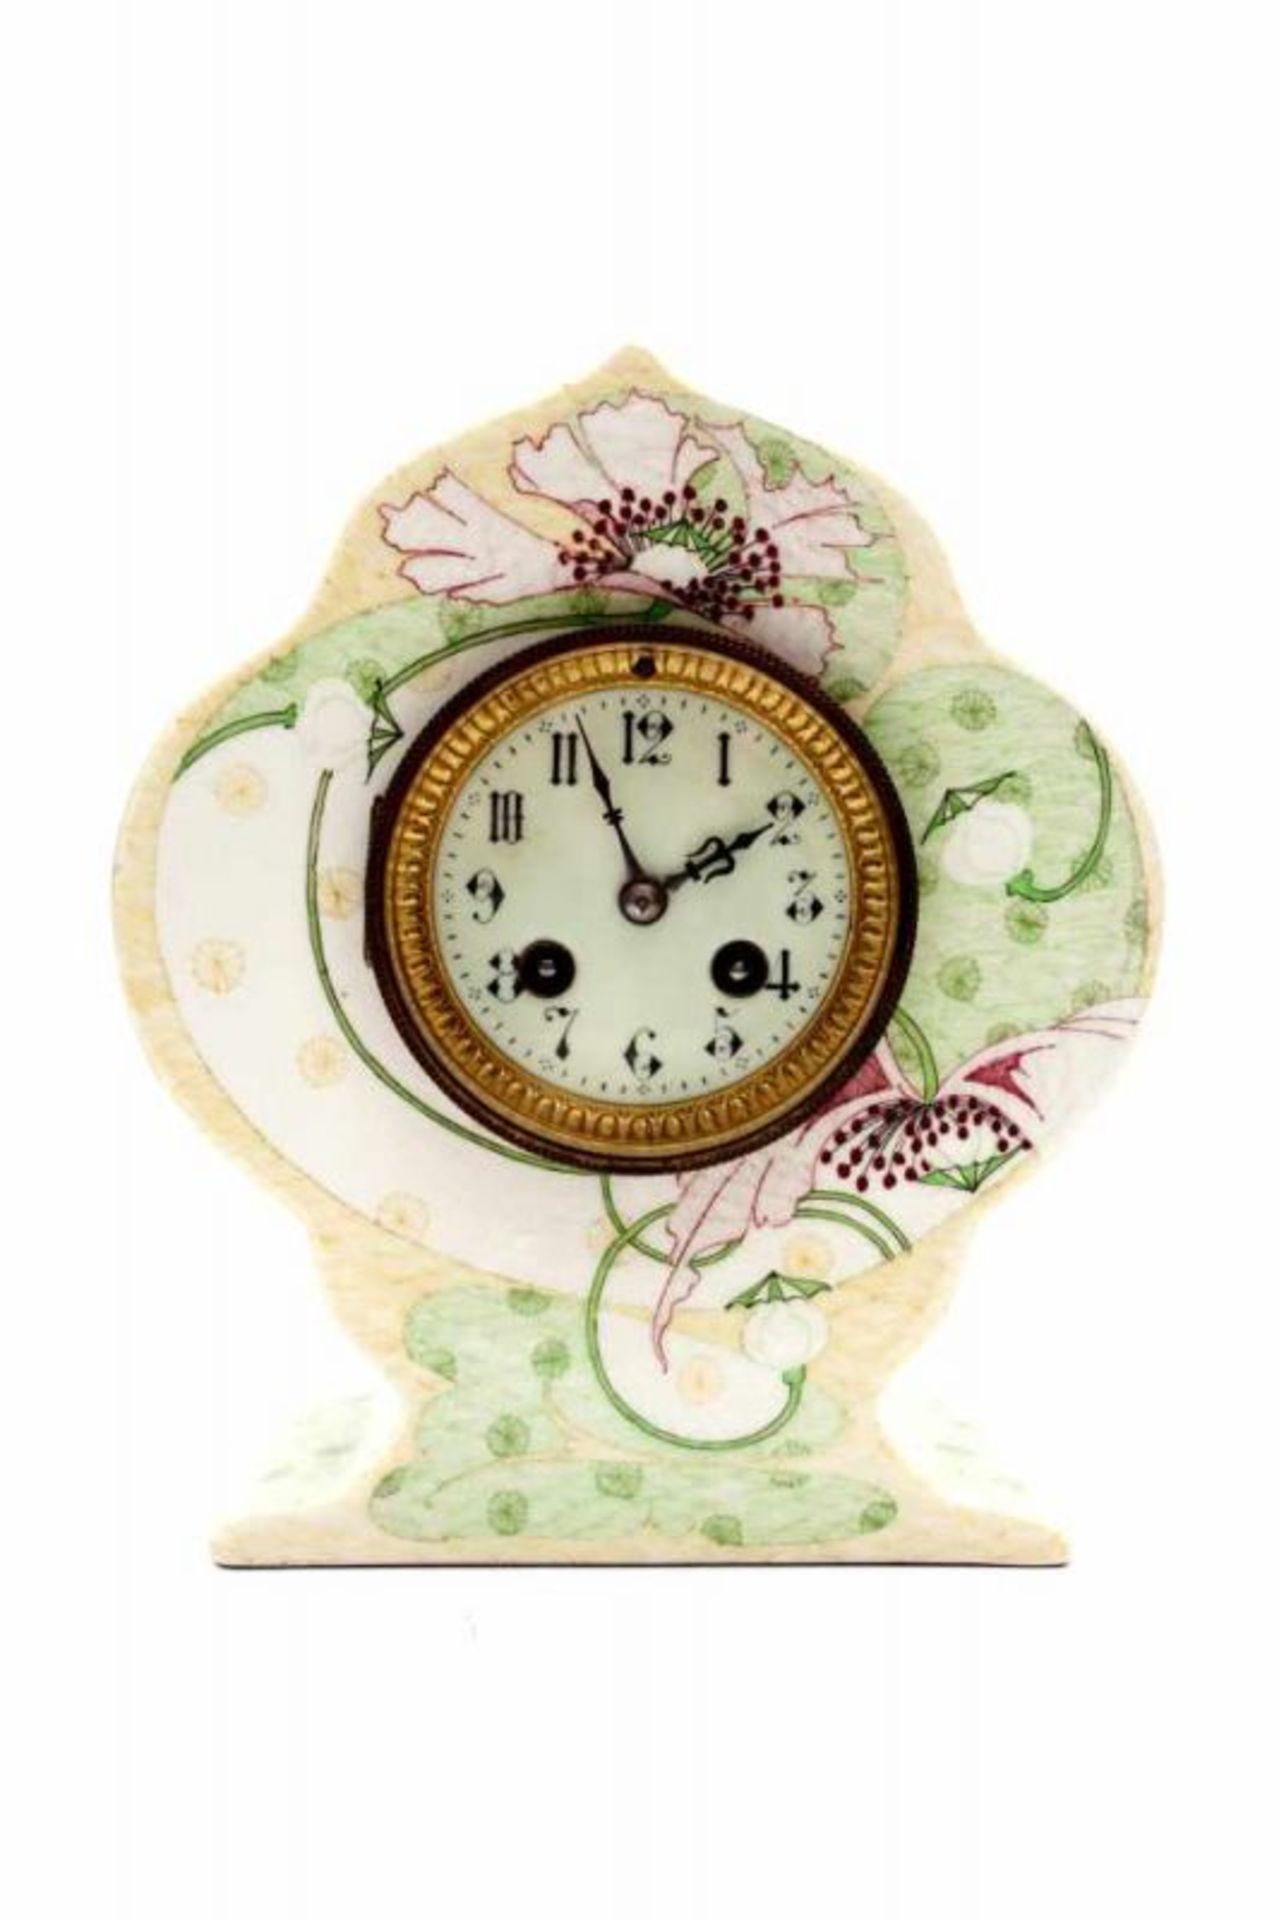 Plateelbakkerij Zuid Holland, Gouda A ceramic clock with wavy floral pattern on a white ground,